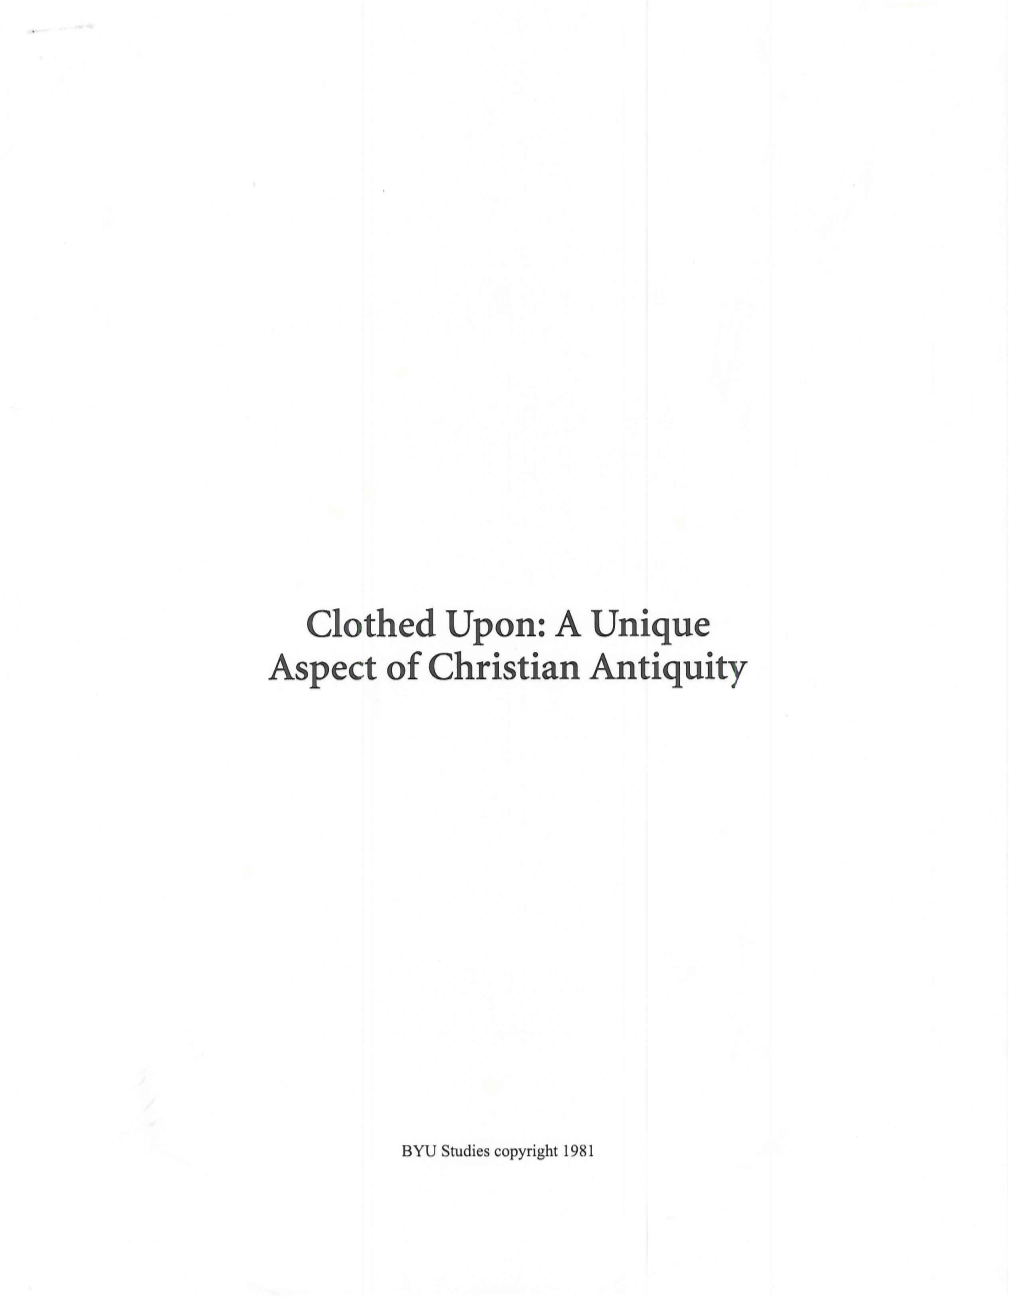 Clothed Upon: a Unique Aspect of Christian Antiquity